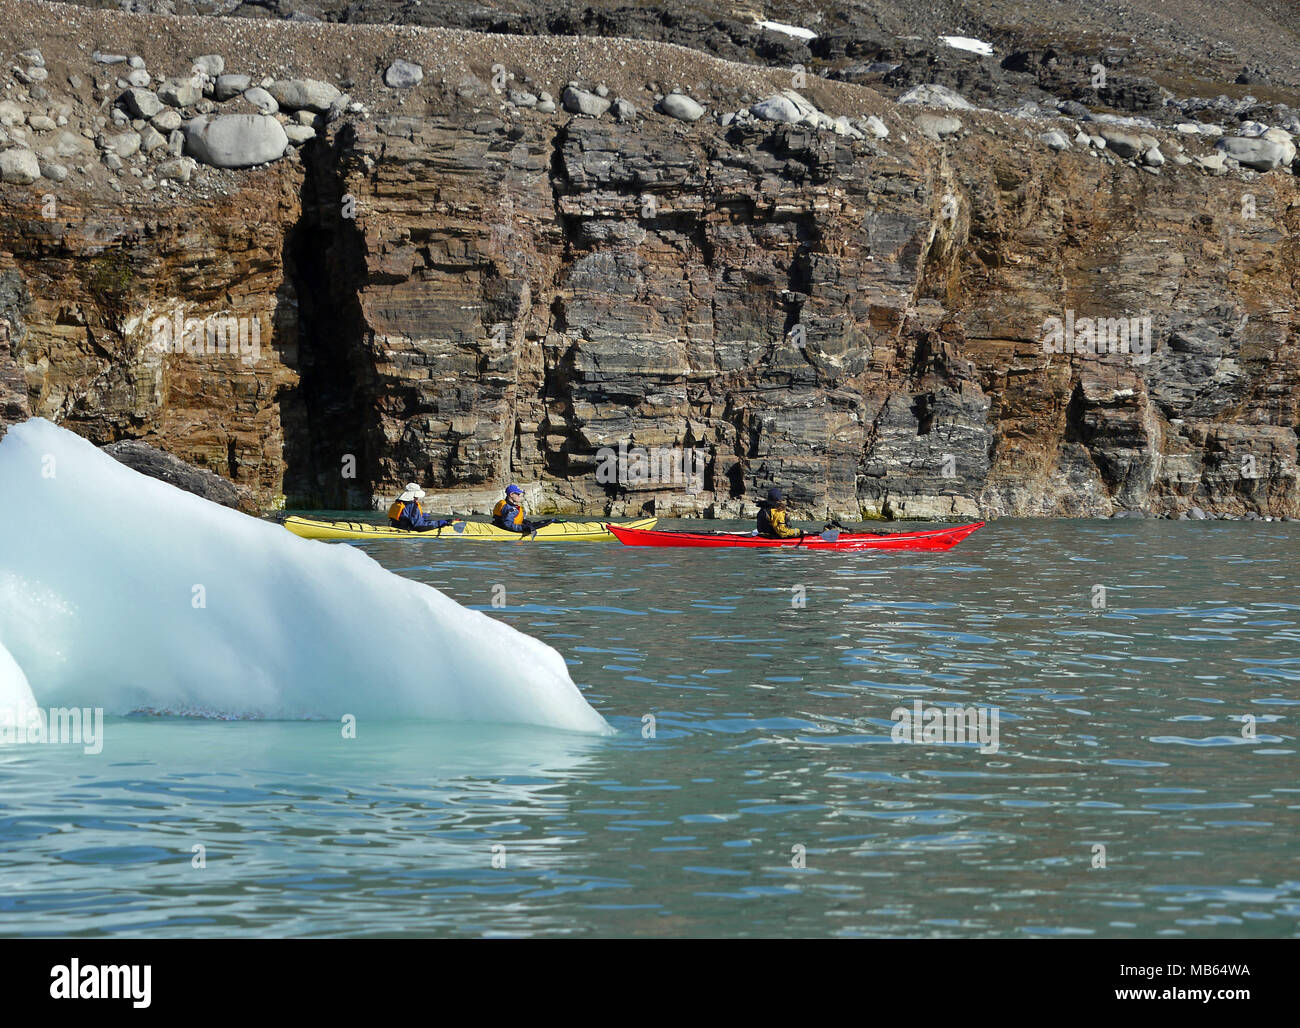 Kayaking in the arctic waters of Spitsbergen on the Svalbard Archipelago in the far north of Norway. Stock Photo